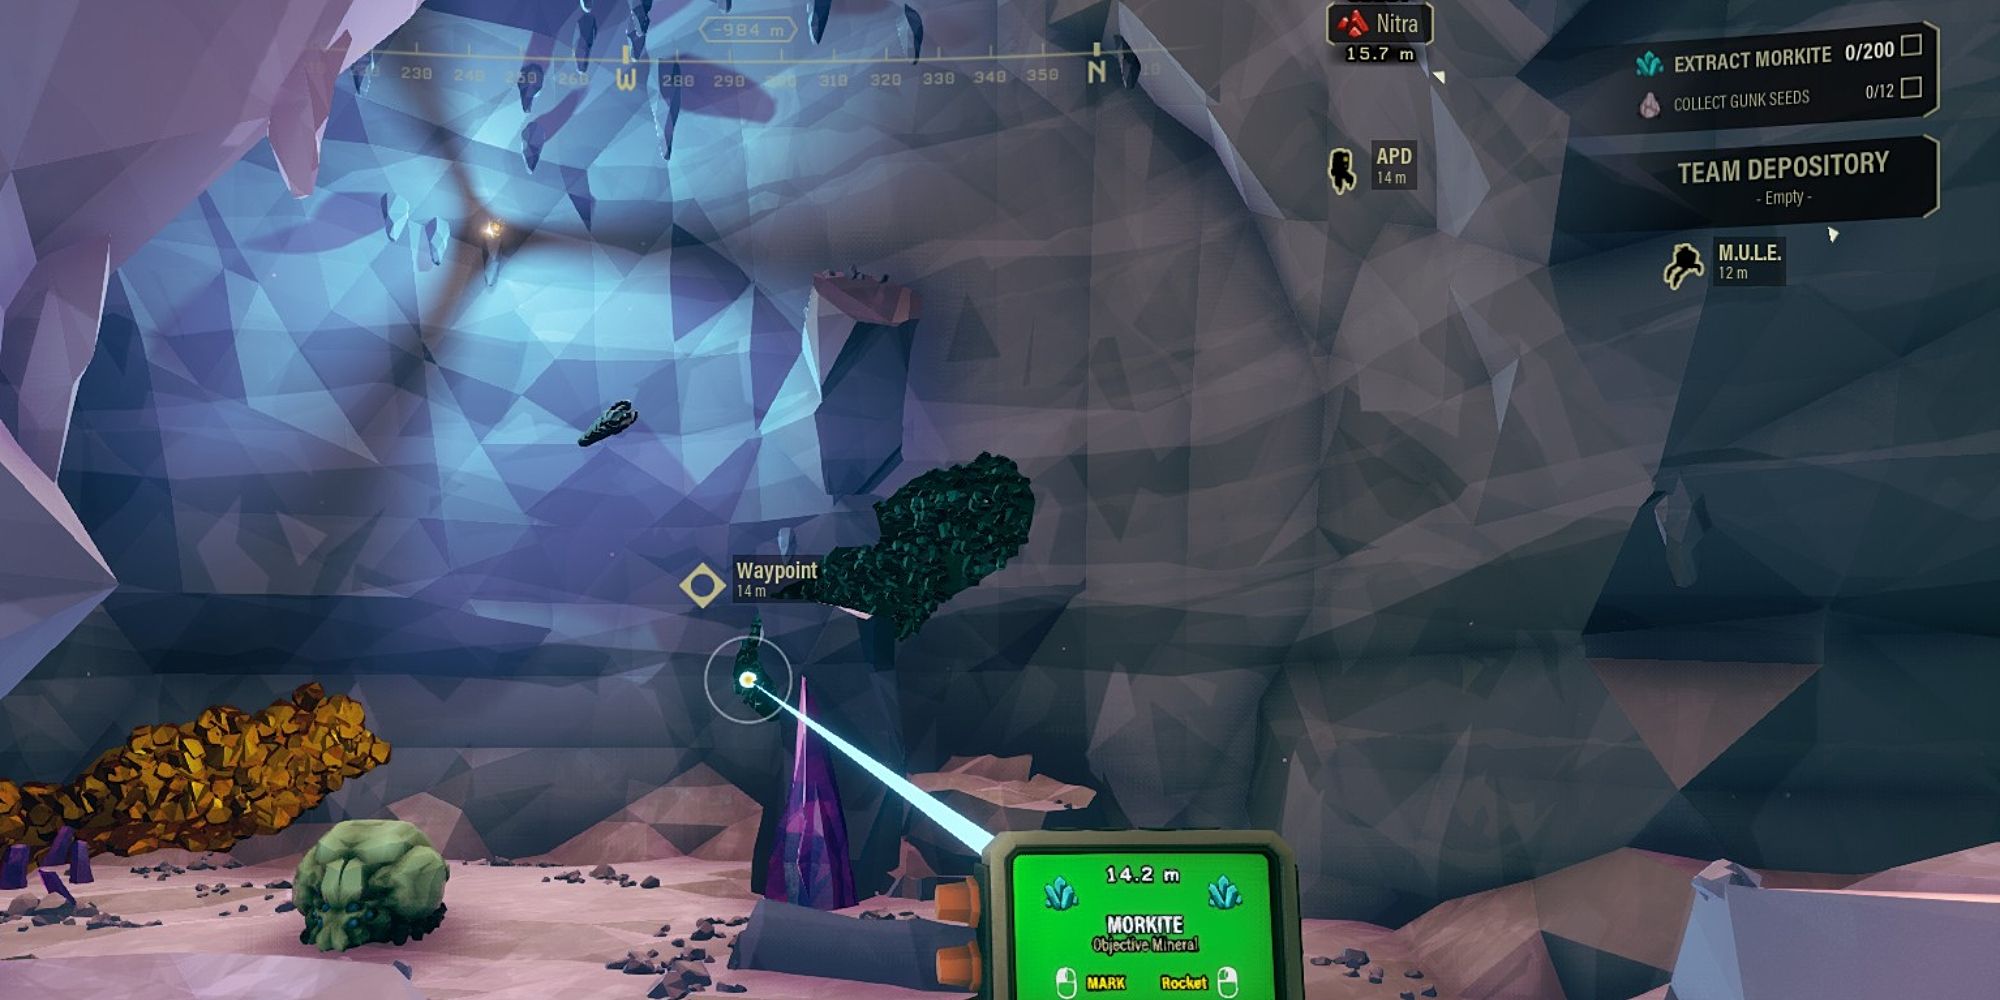 Using the waypoint function in Deep Rock Galactic to highlight Morkite